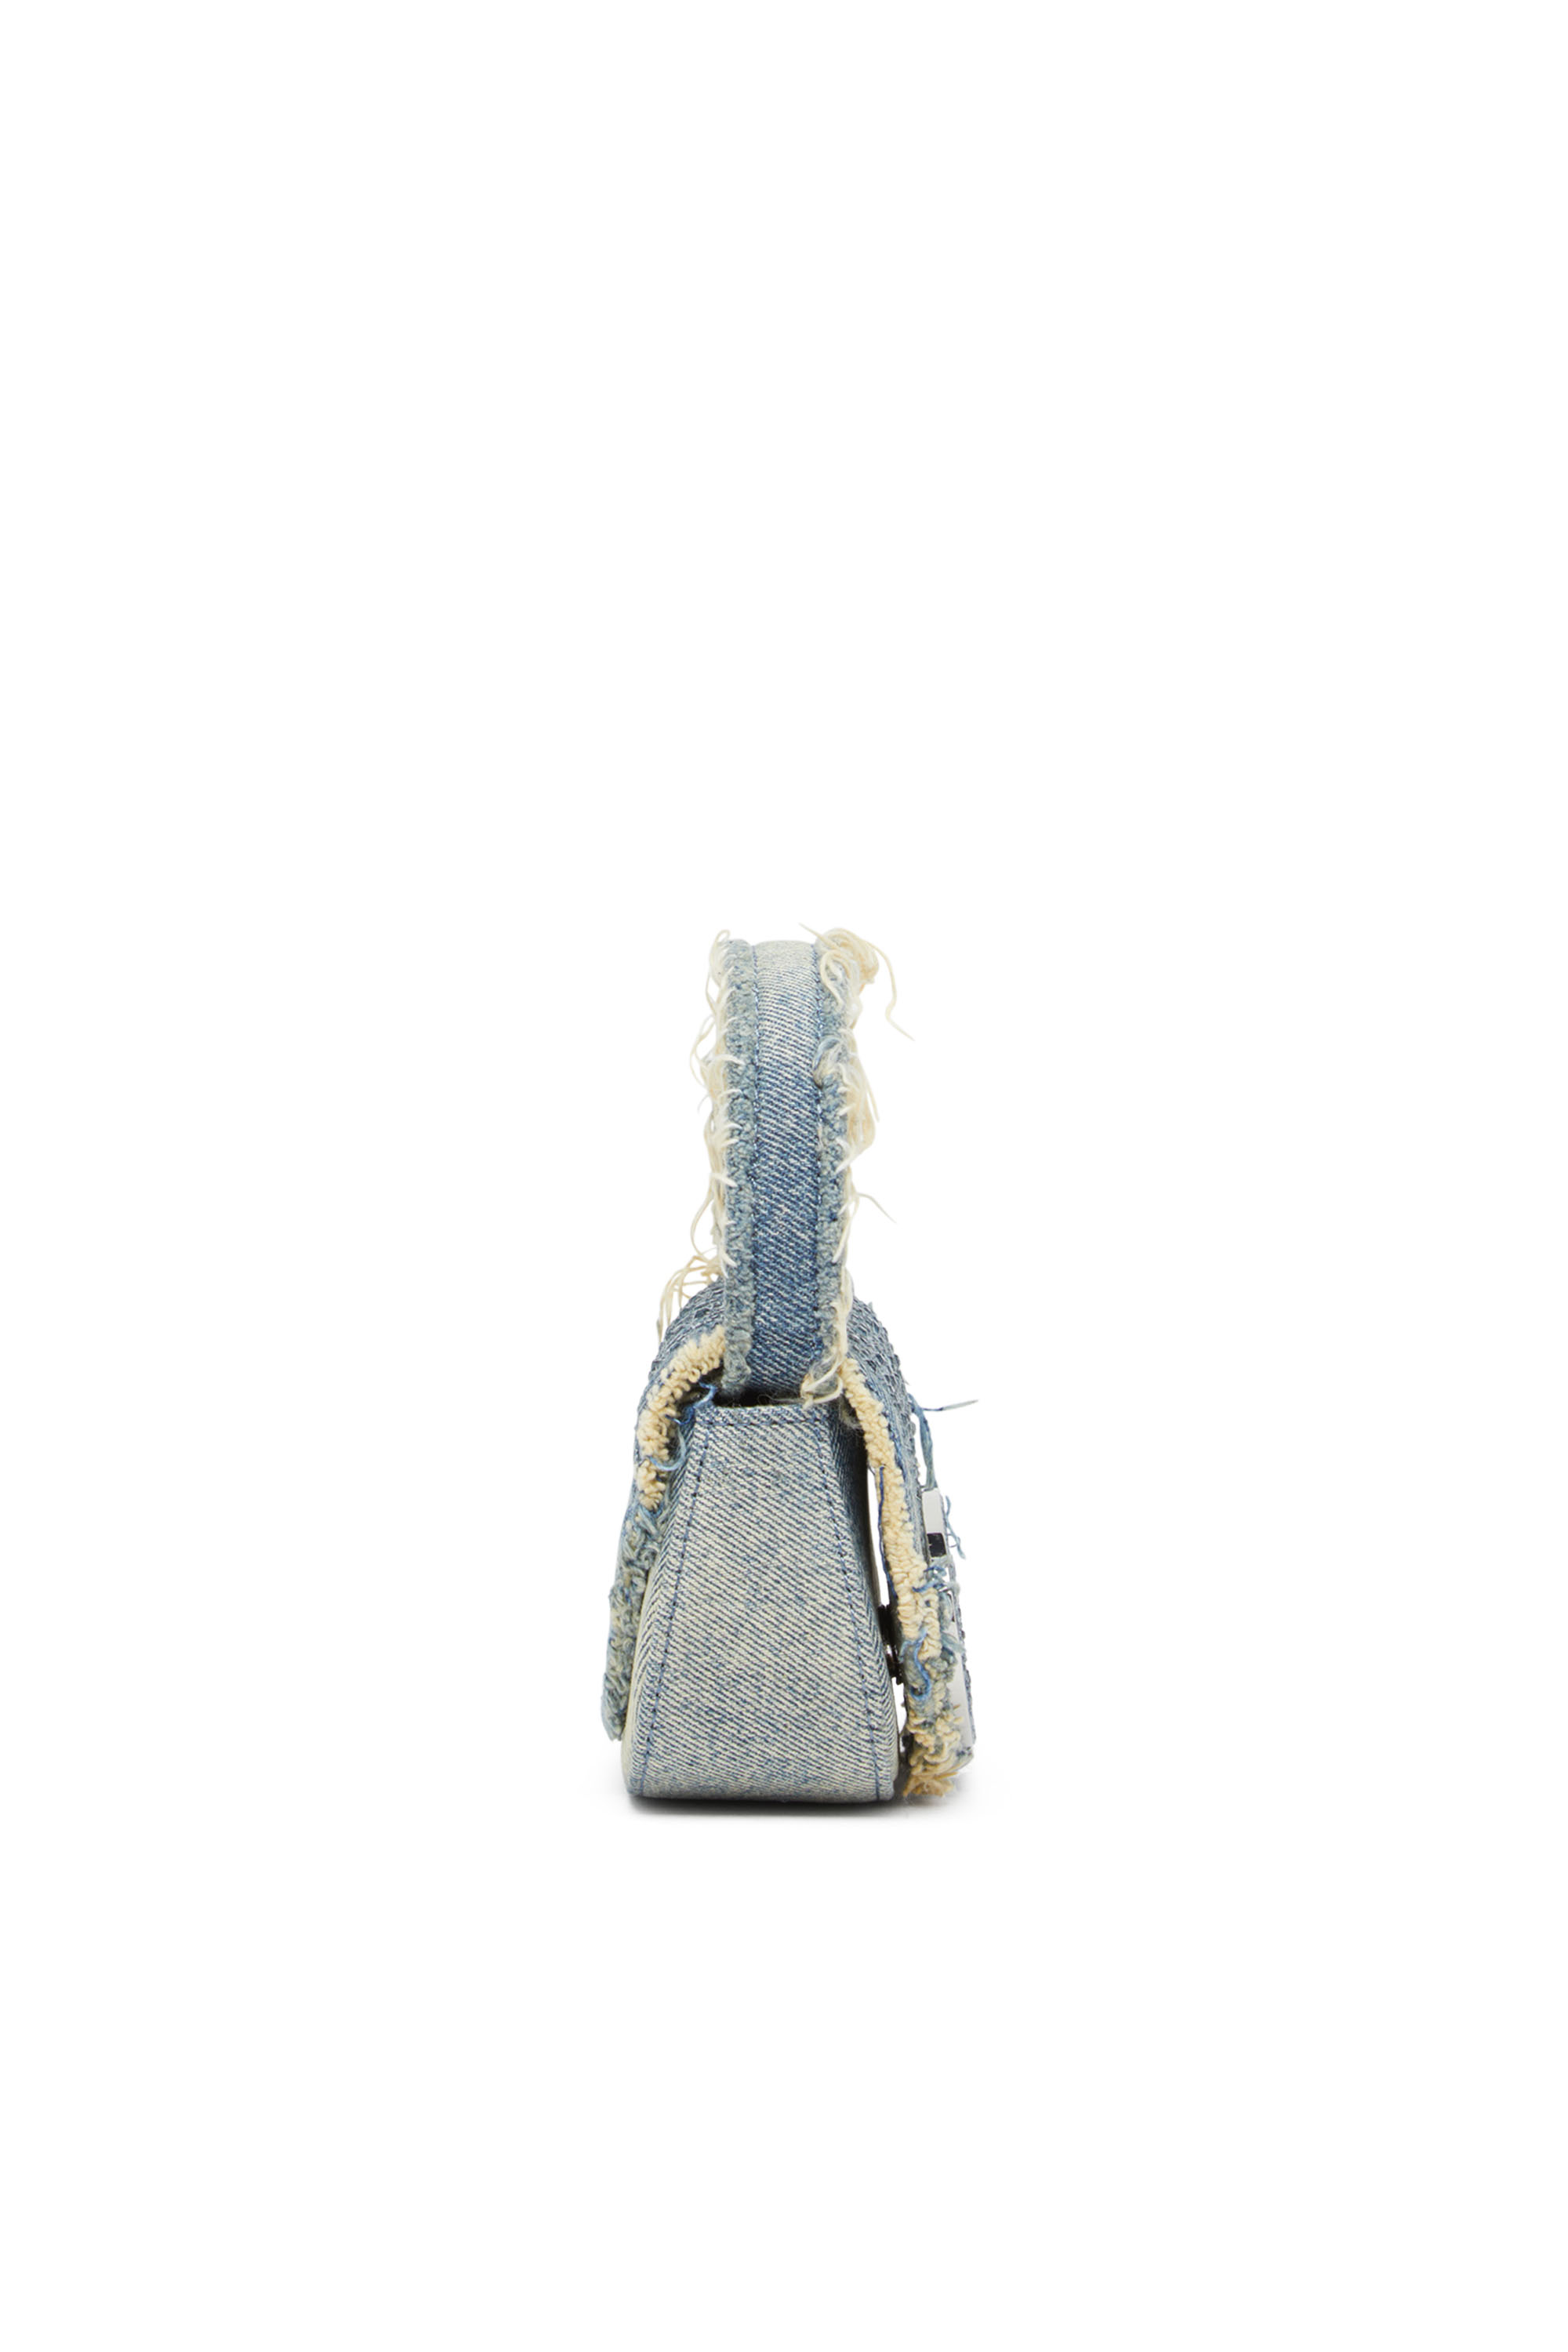 Diesel - 1DR XS, Female 1DR XS-Iconic mini bag in denim and crystals in ブルー - Image 3